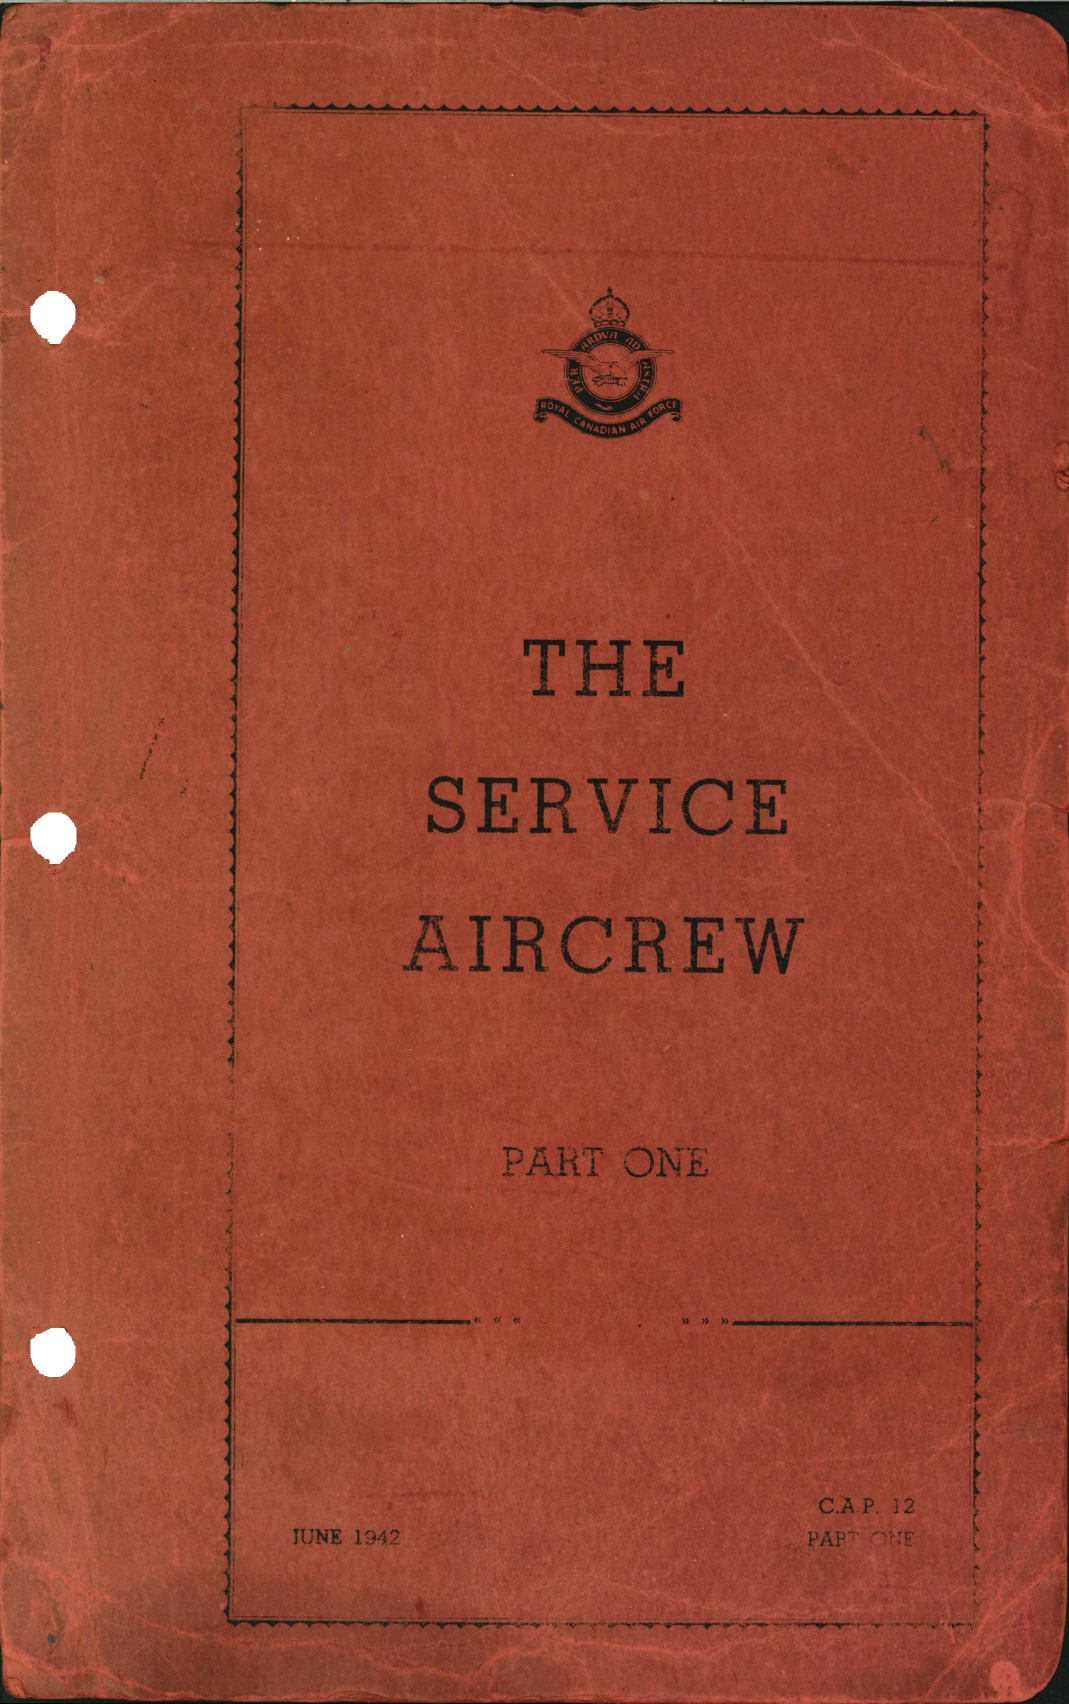 Sample page 1 from AirCorps Library document: The Service Aircrew Part One